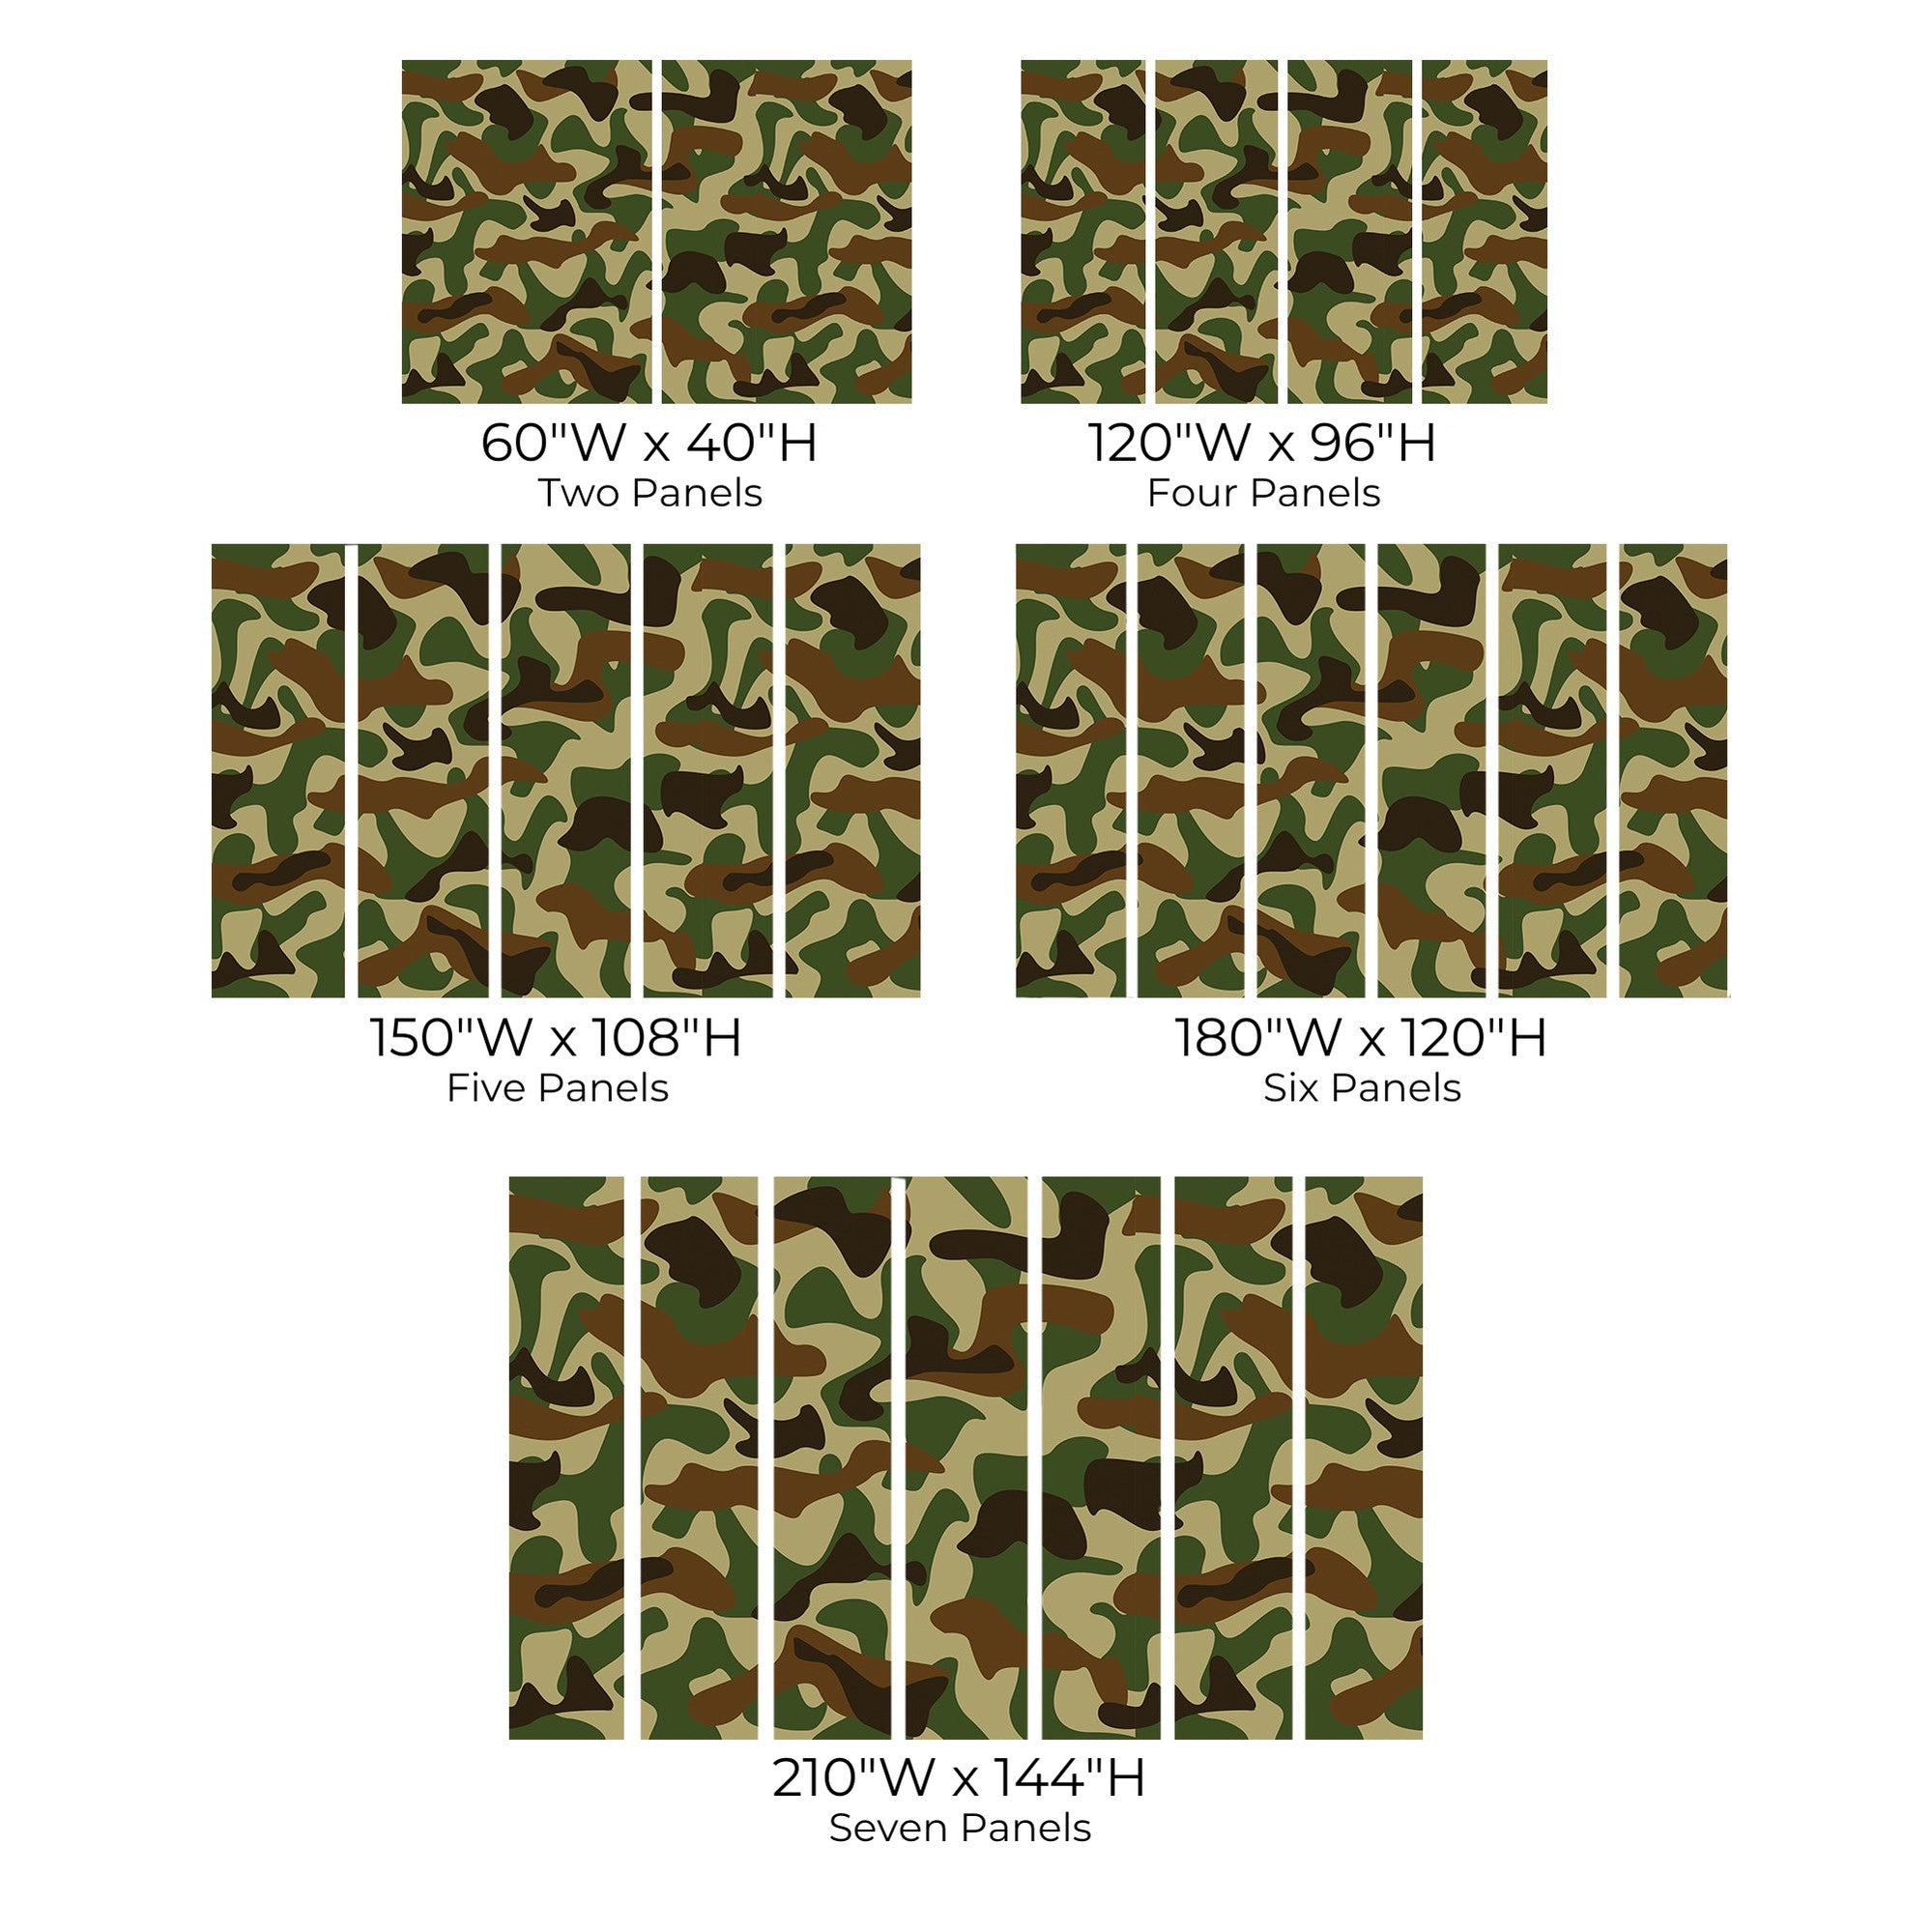 Various sizes of camouflage wall mural panels displayed against a white background with dimensions labeled